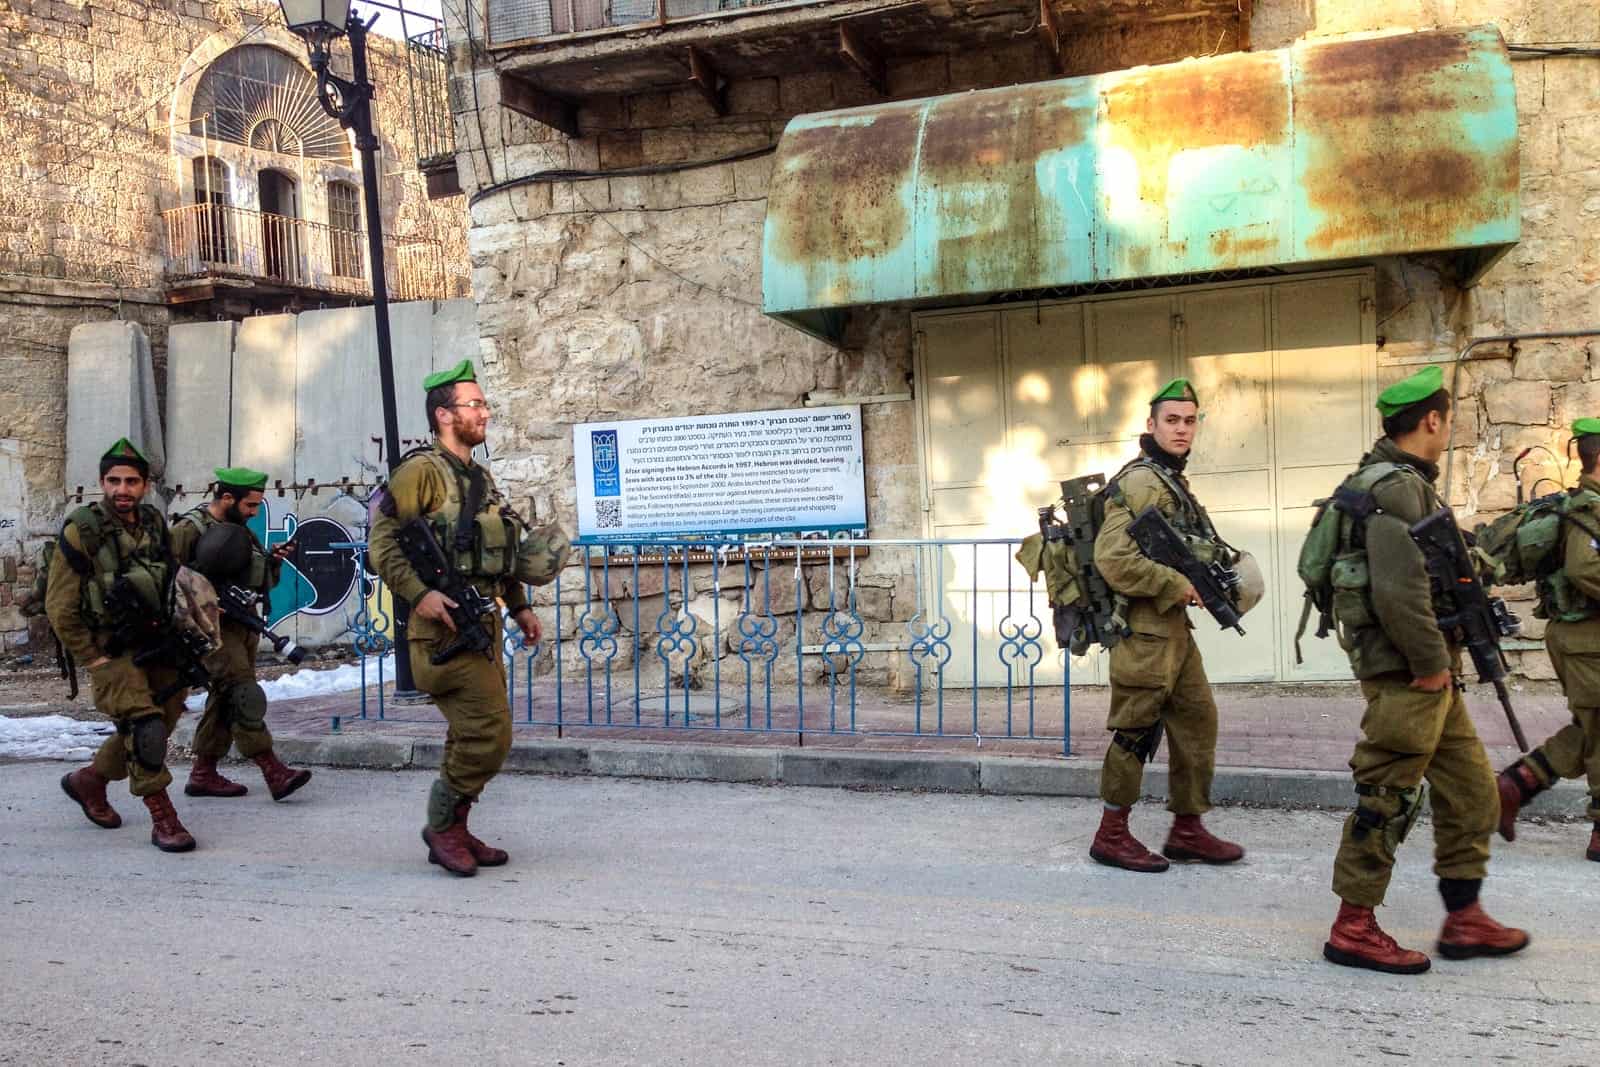 Israeli soldiers on the streets of Hebron in the West Bank where tourists can visit